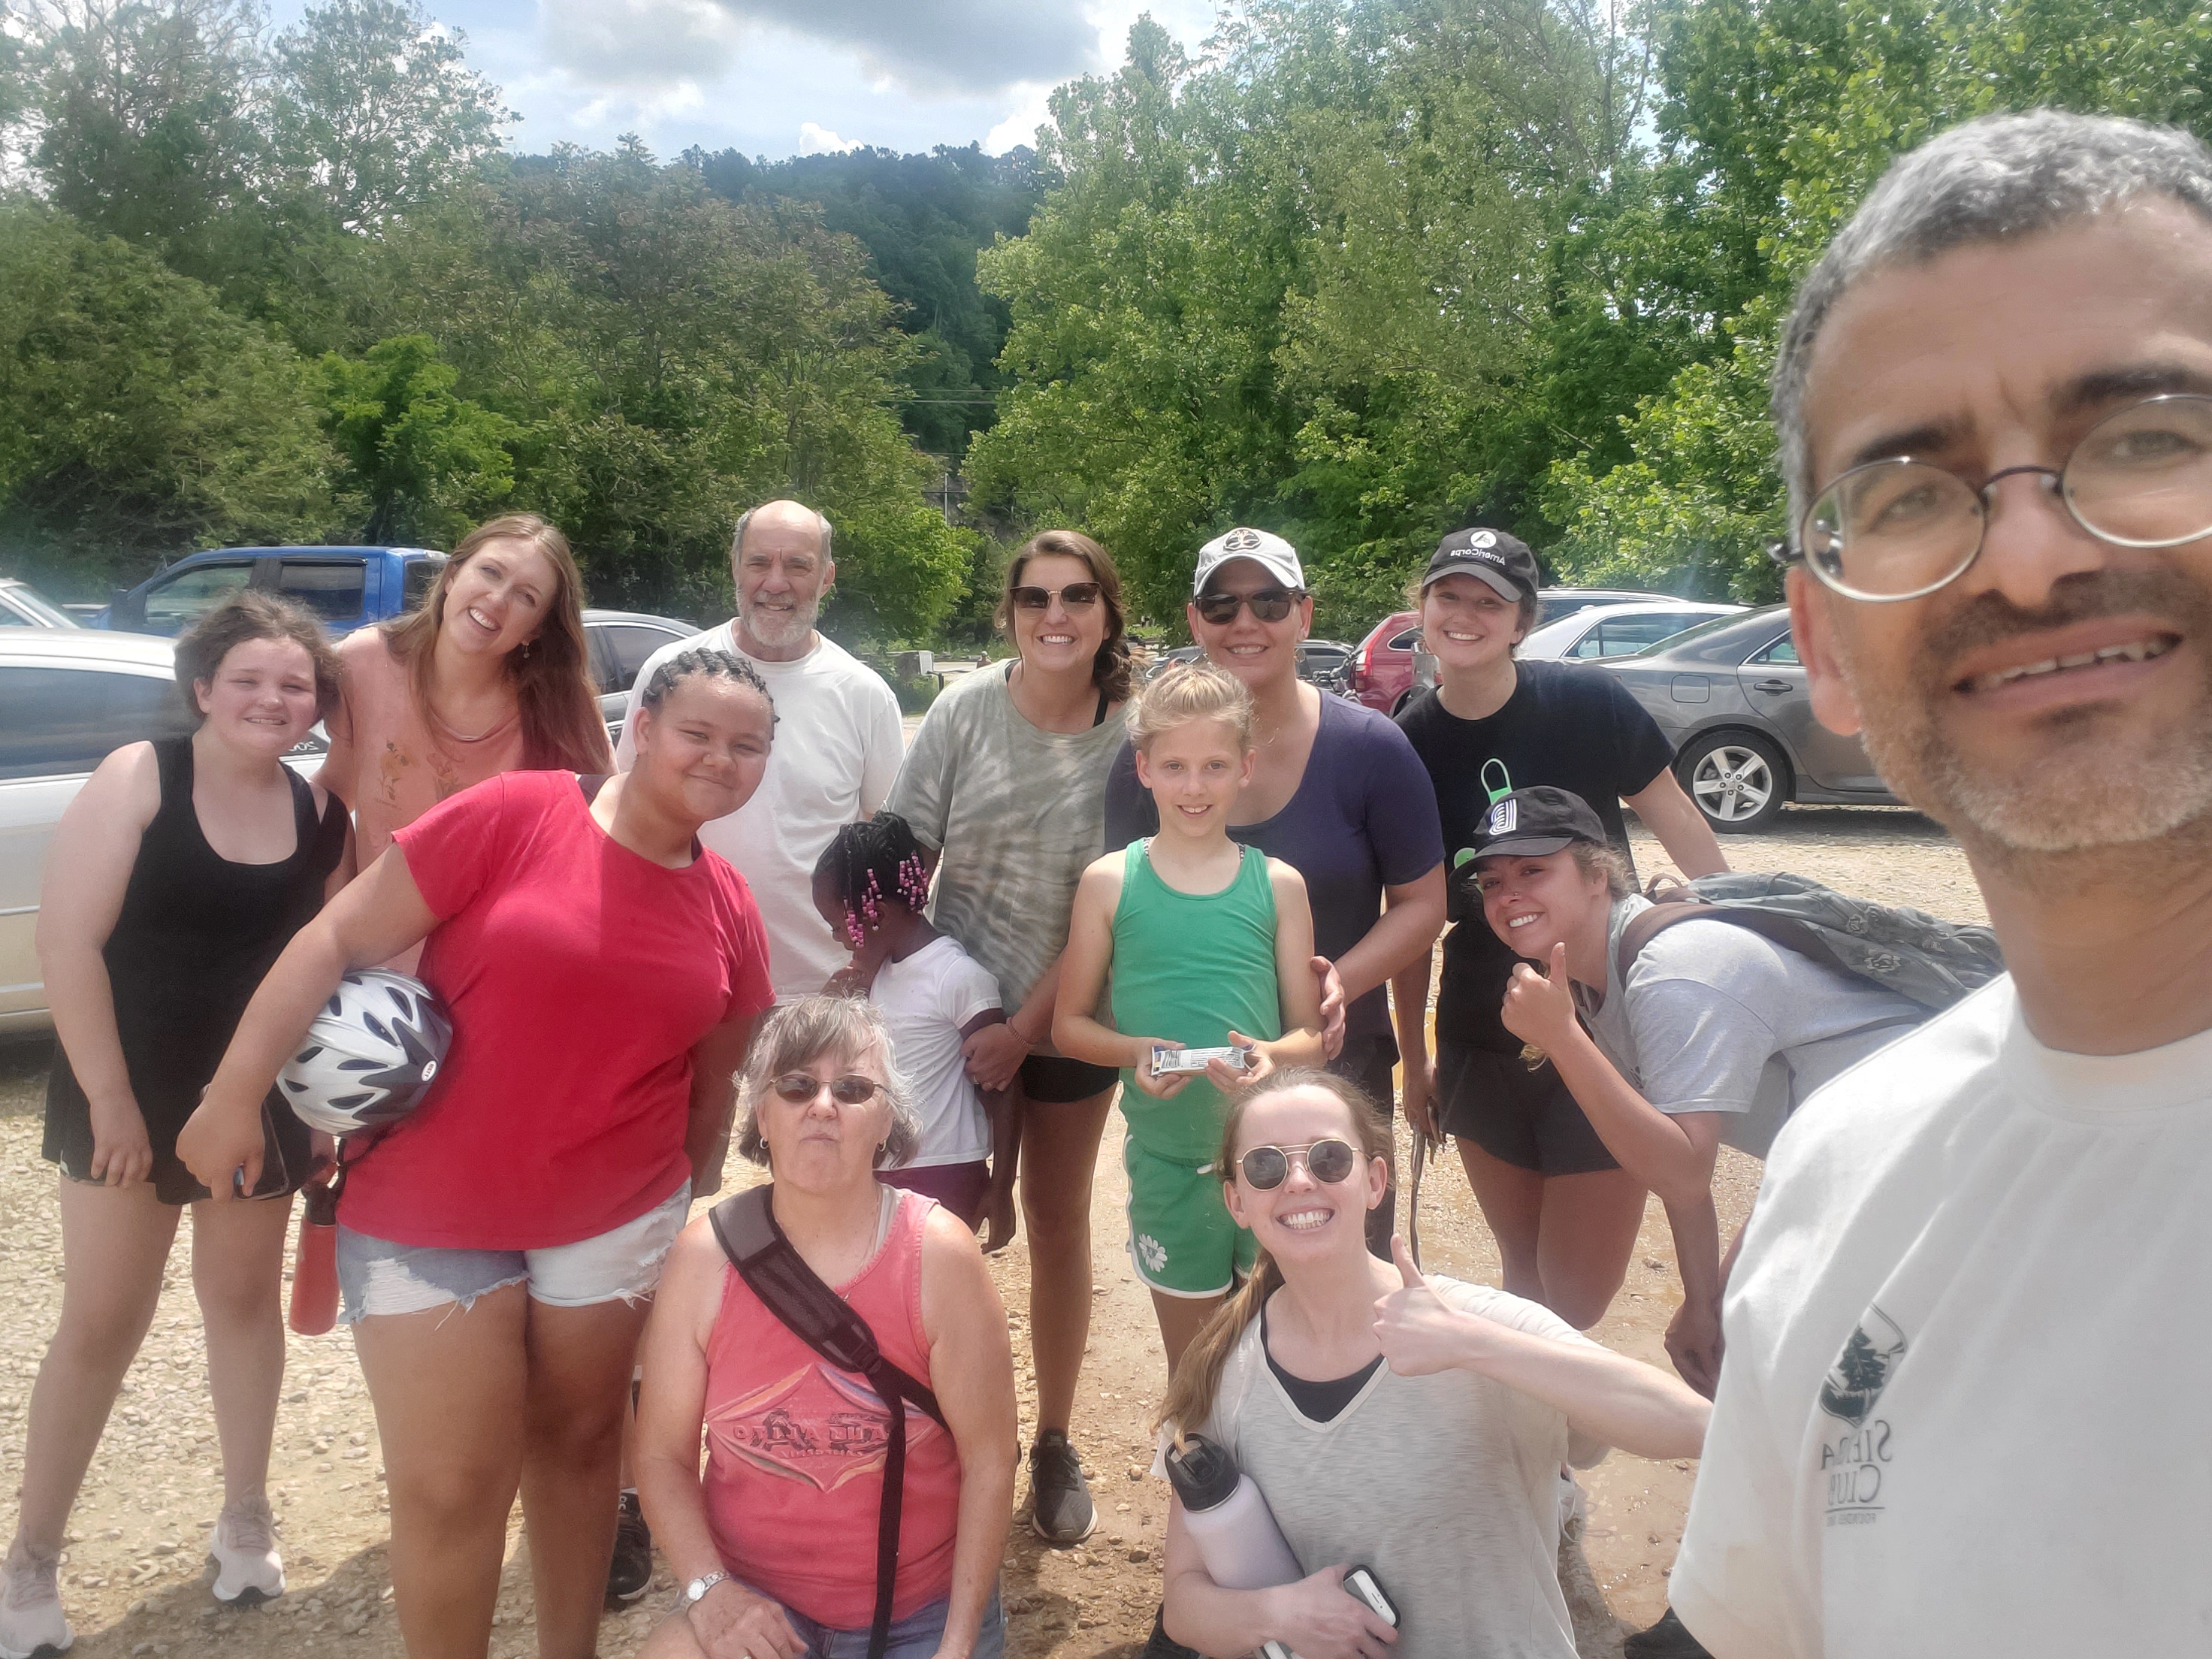 BBBS & Amachi Bicycle ride at Forks-of-the-River WMA